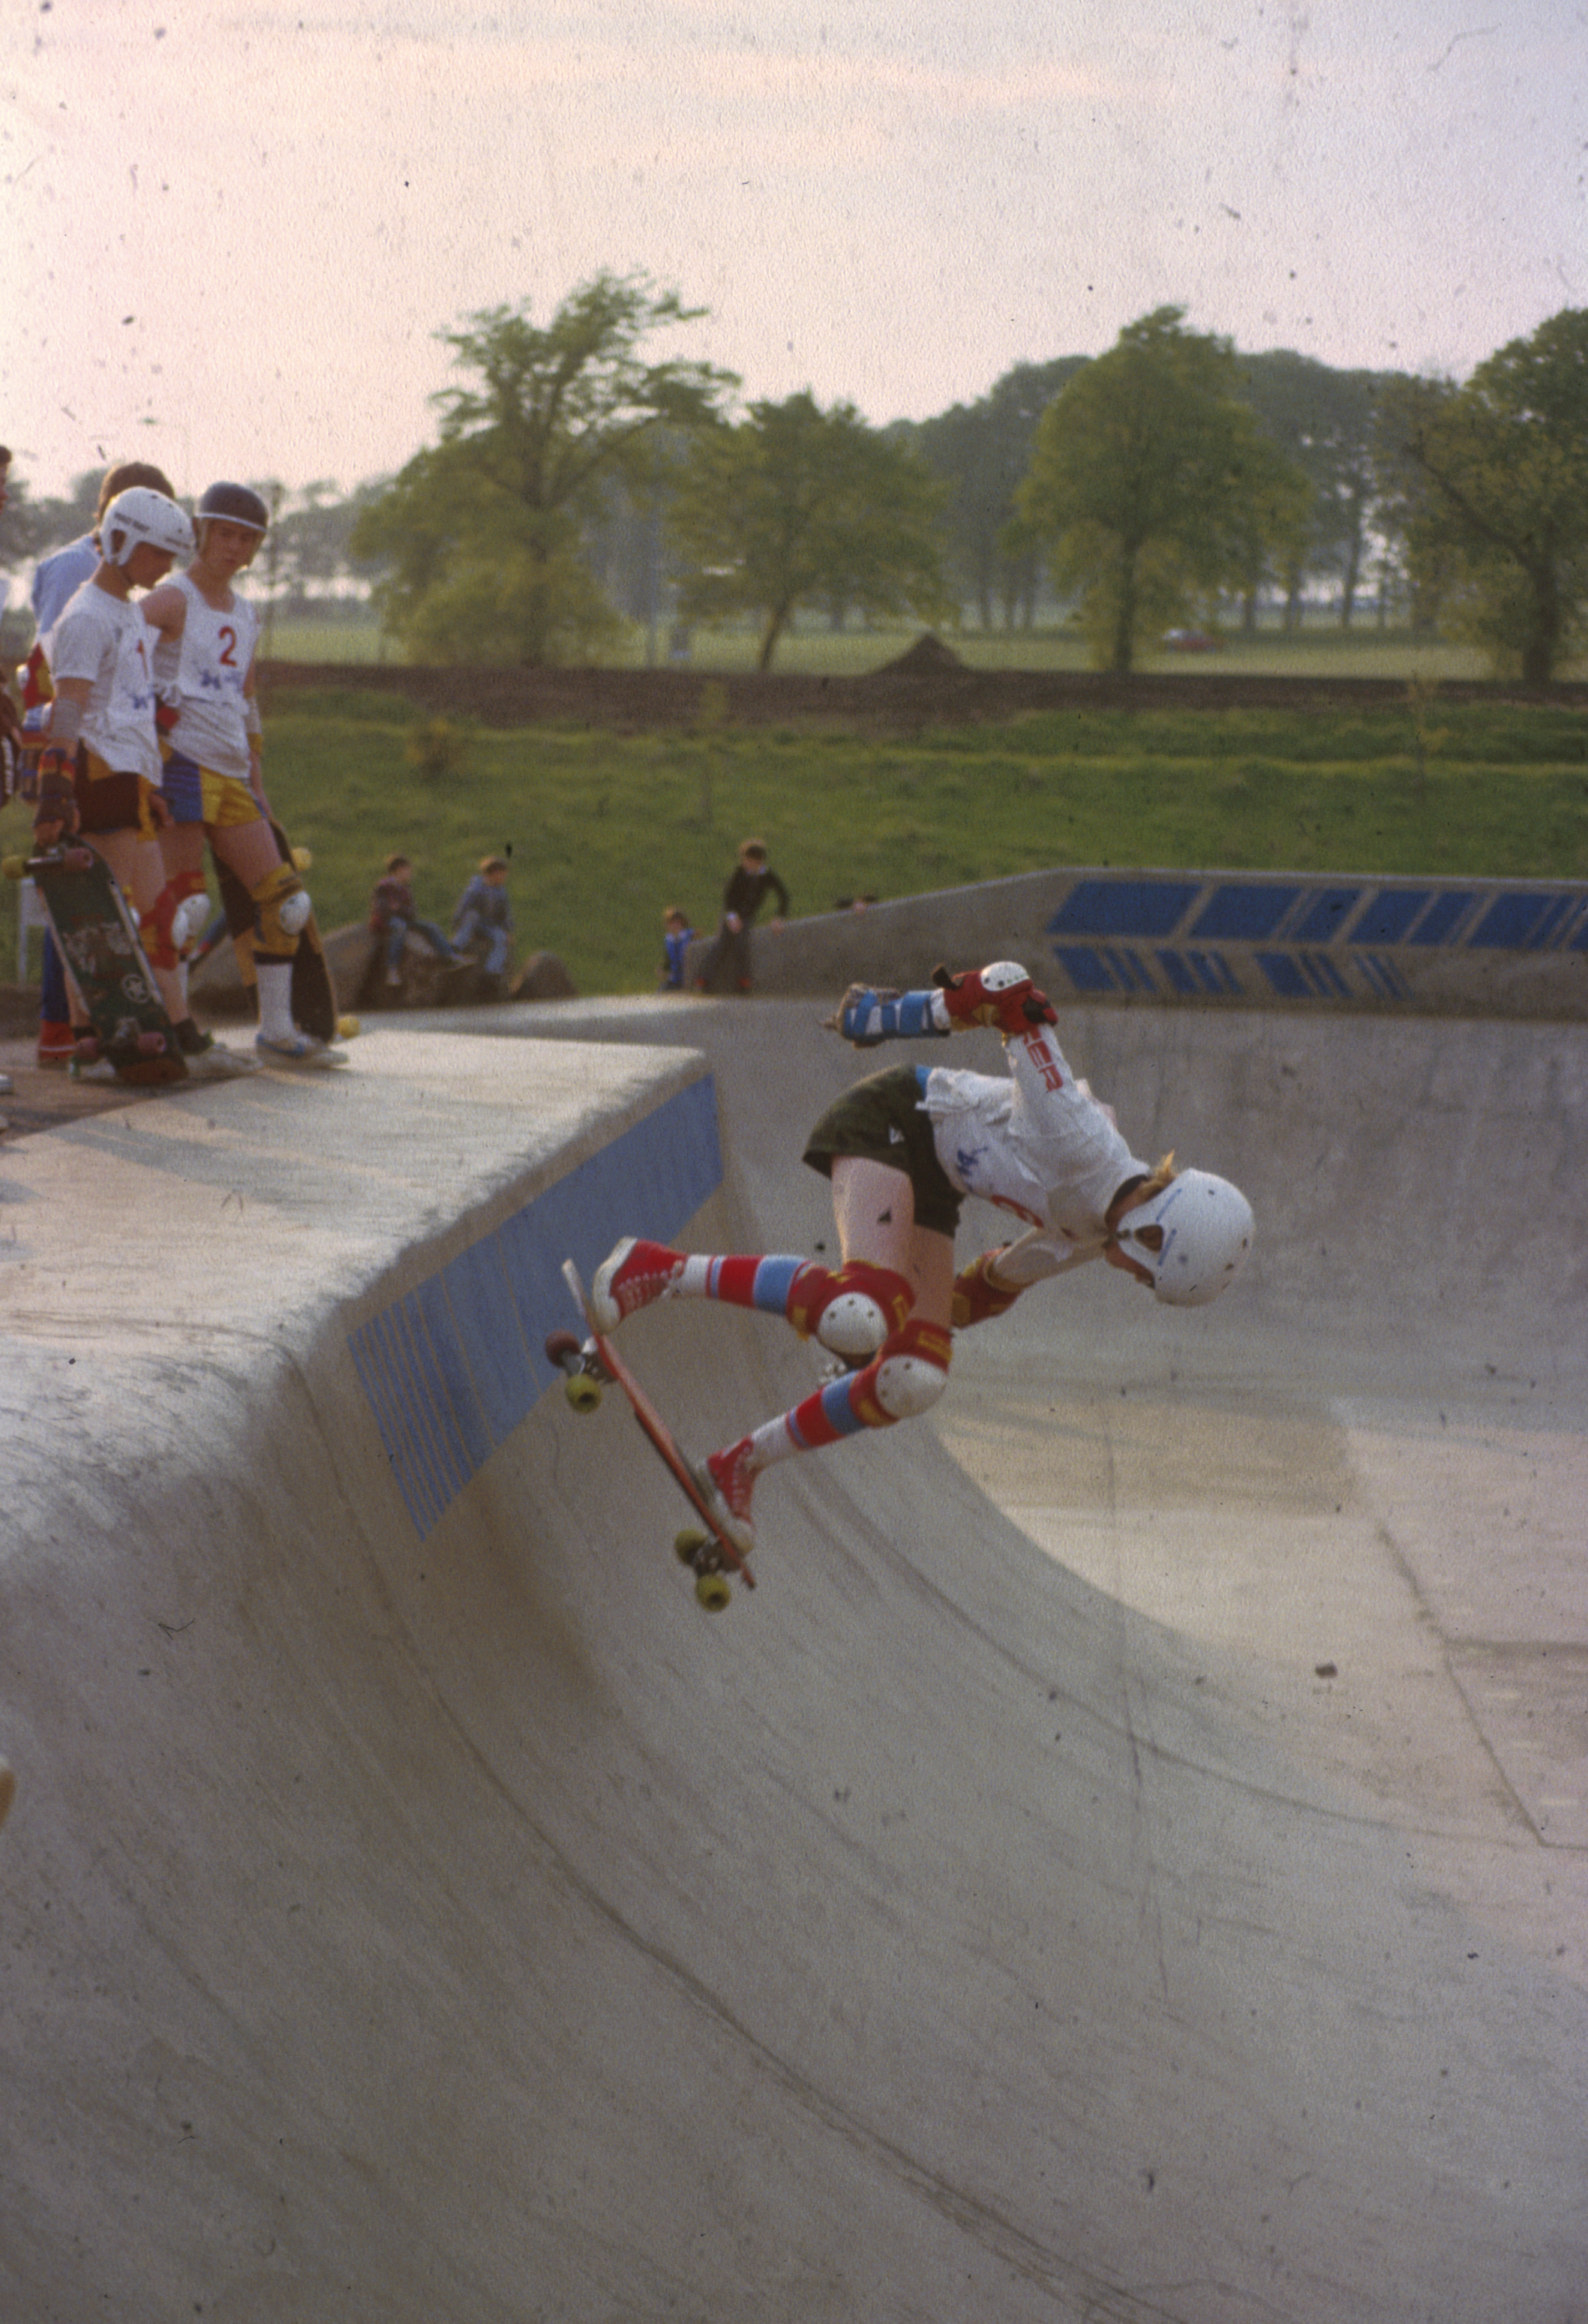 Archive image of skate-boarder with white top and helmet dropping into bowl, watched by skateboarders on ledge to left